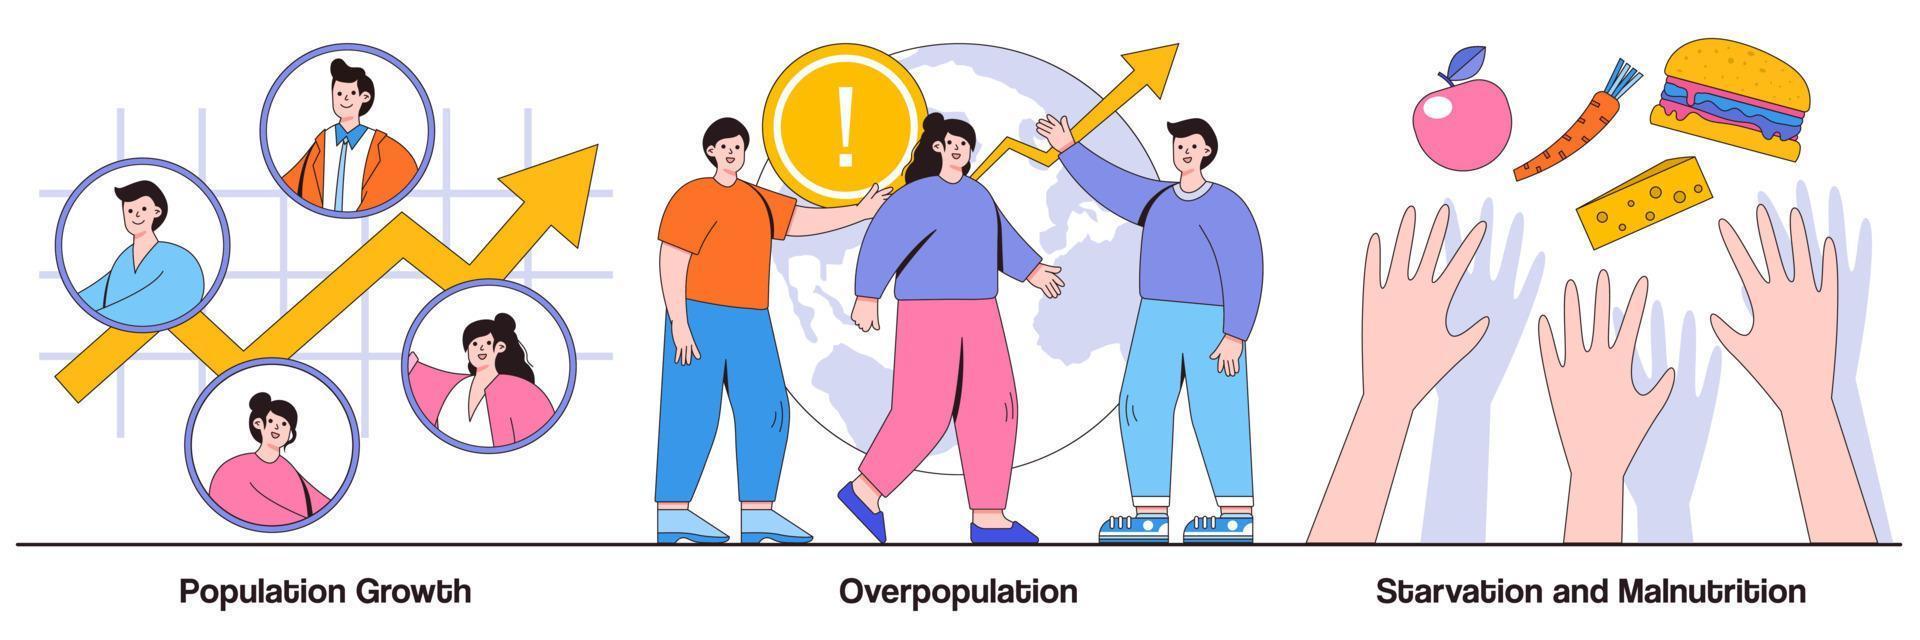 Population Growth, Overpopulation, Starvation, and Malnutrition Illustrated Pack vector